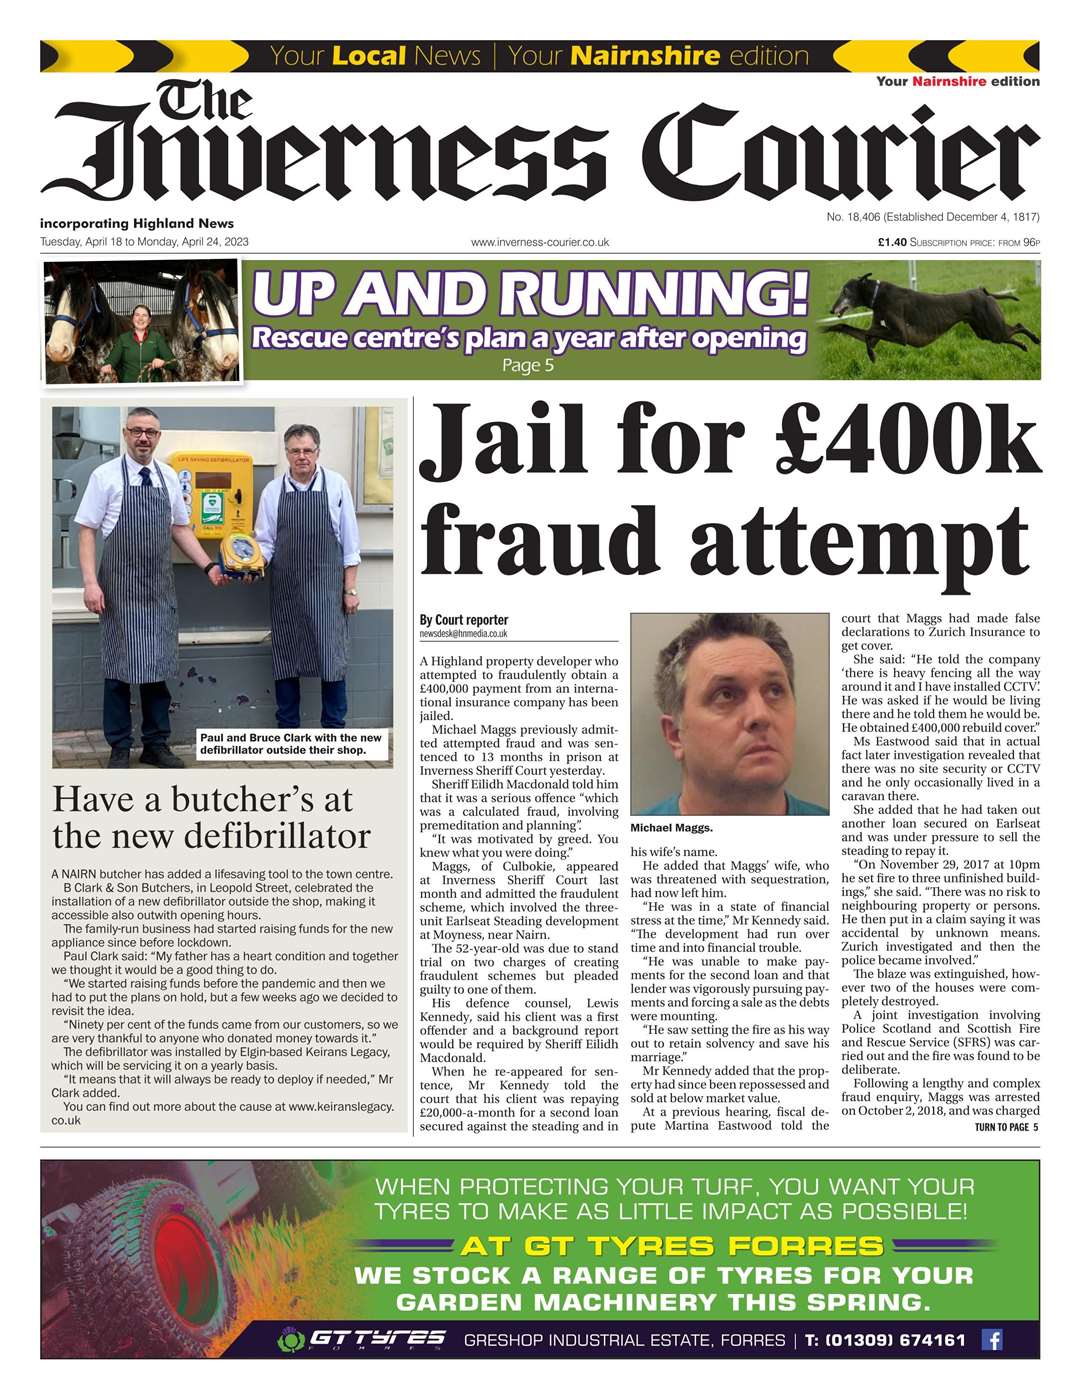 The Inverness Courier (Nairnshire edition), April 18, front page.